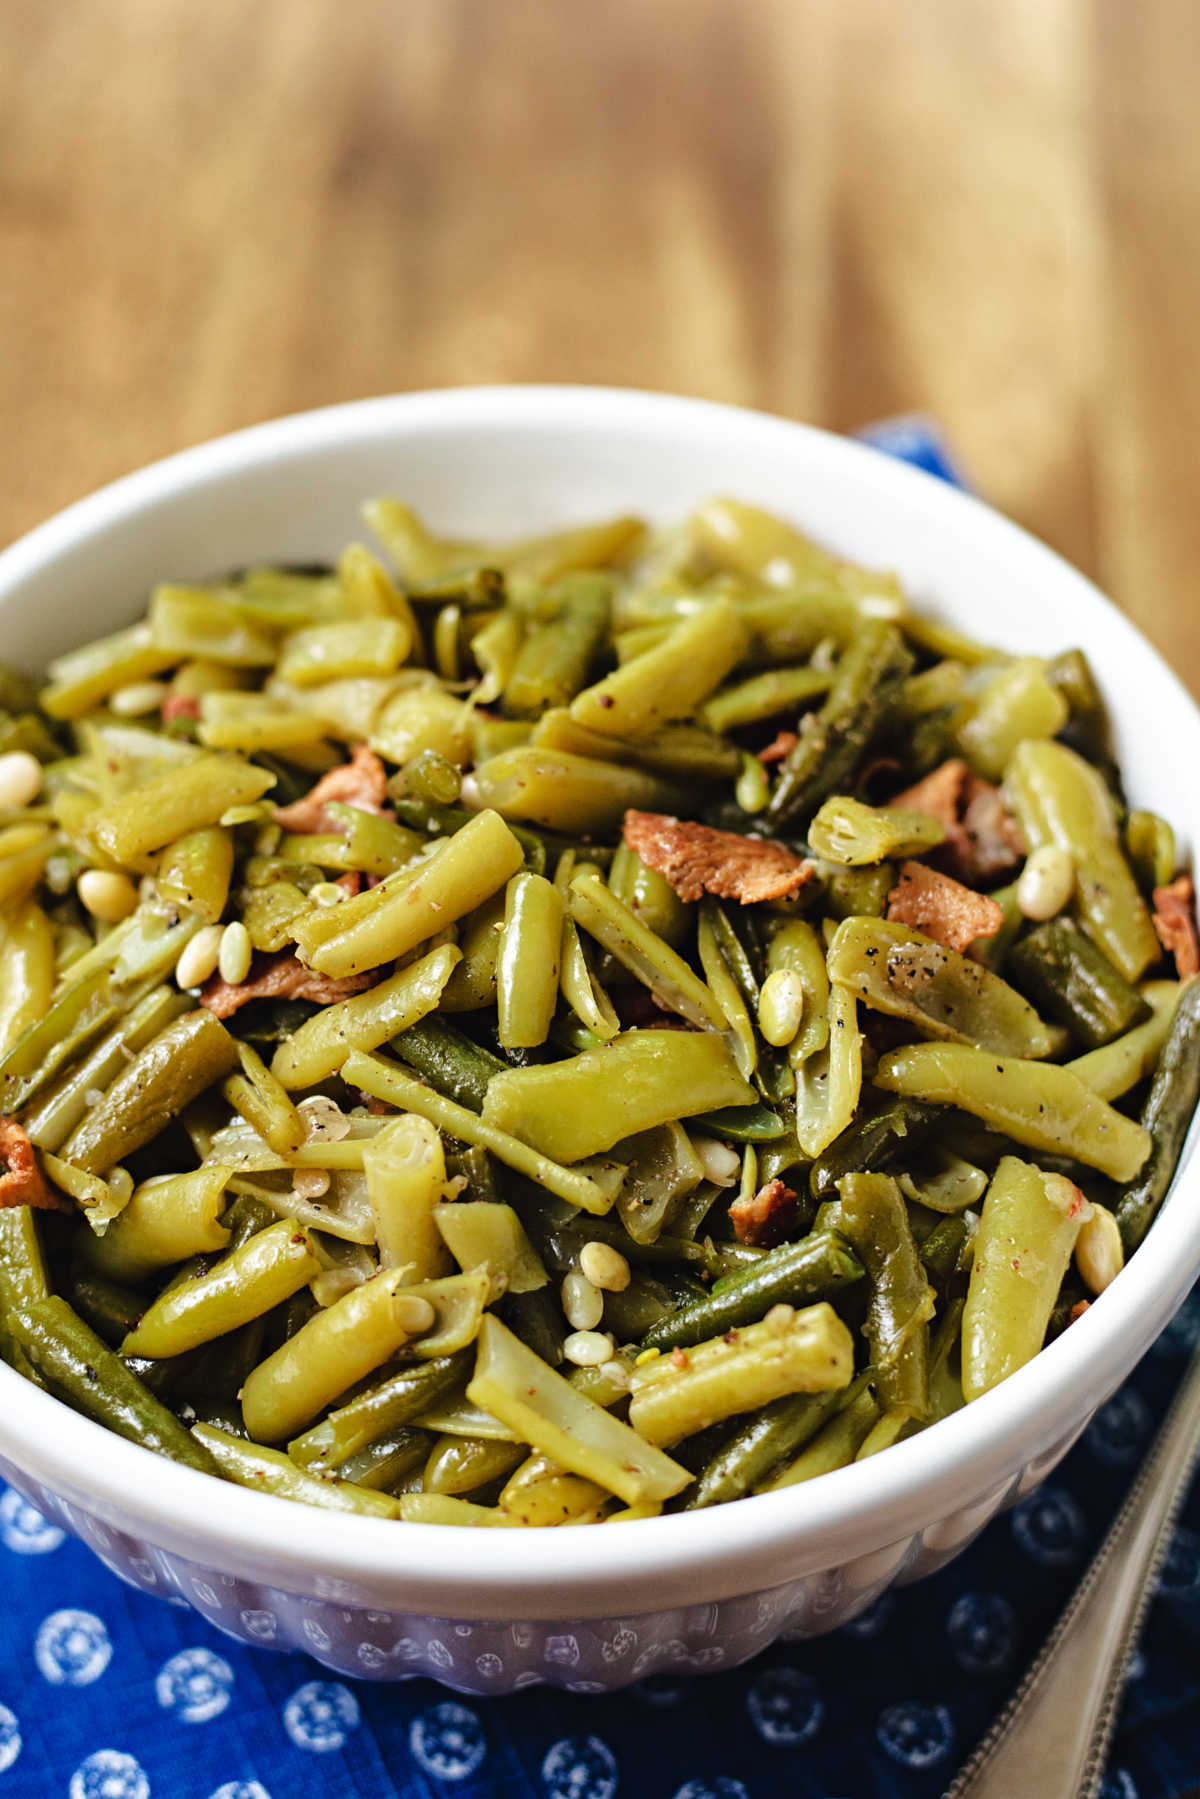 a bowl of green beans sitting on a blue napkin on a wooden table.